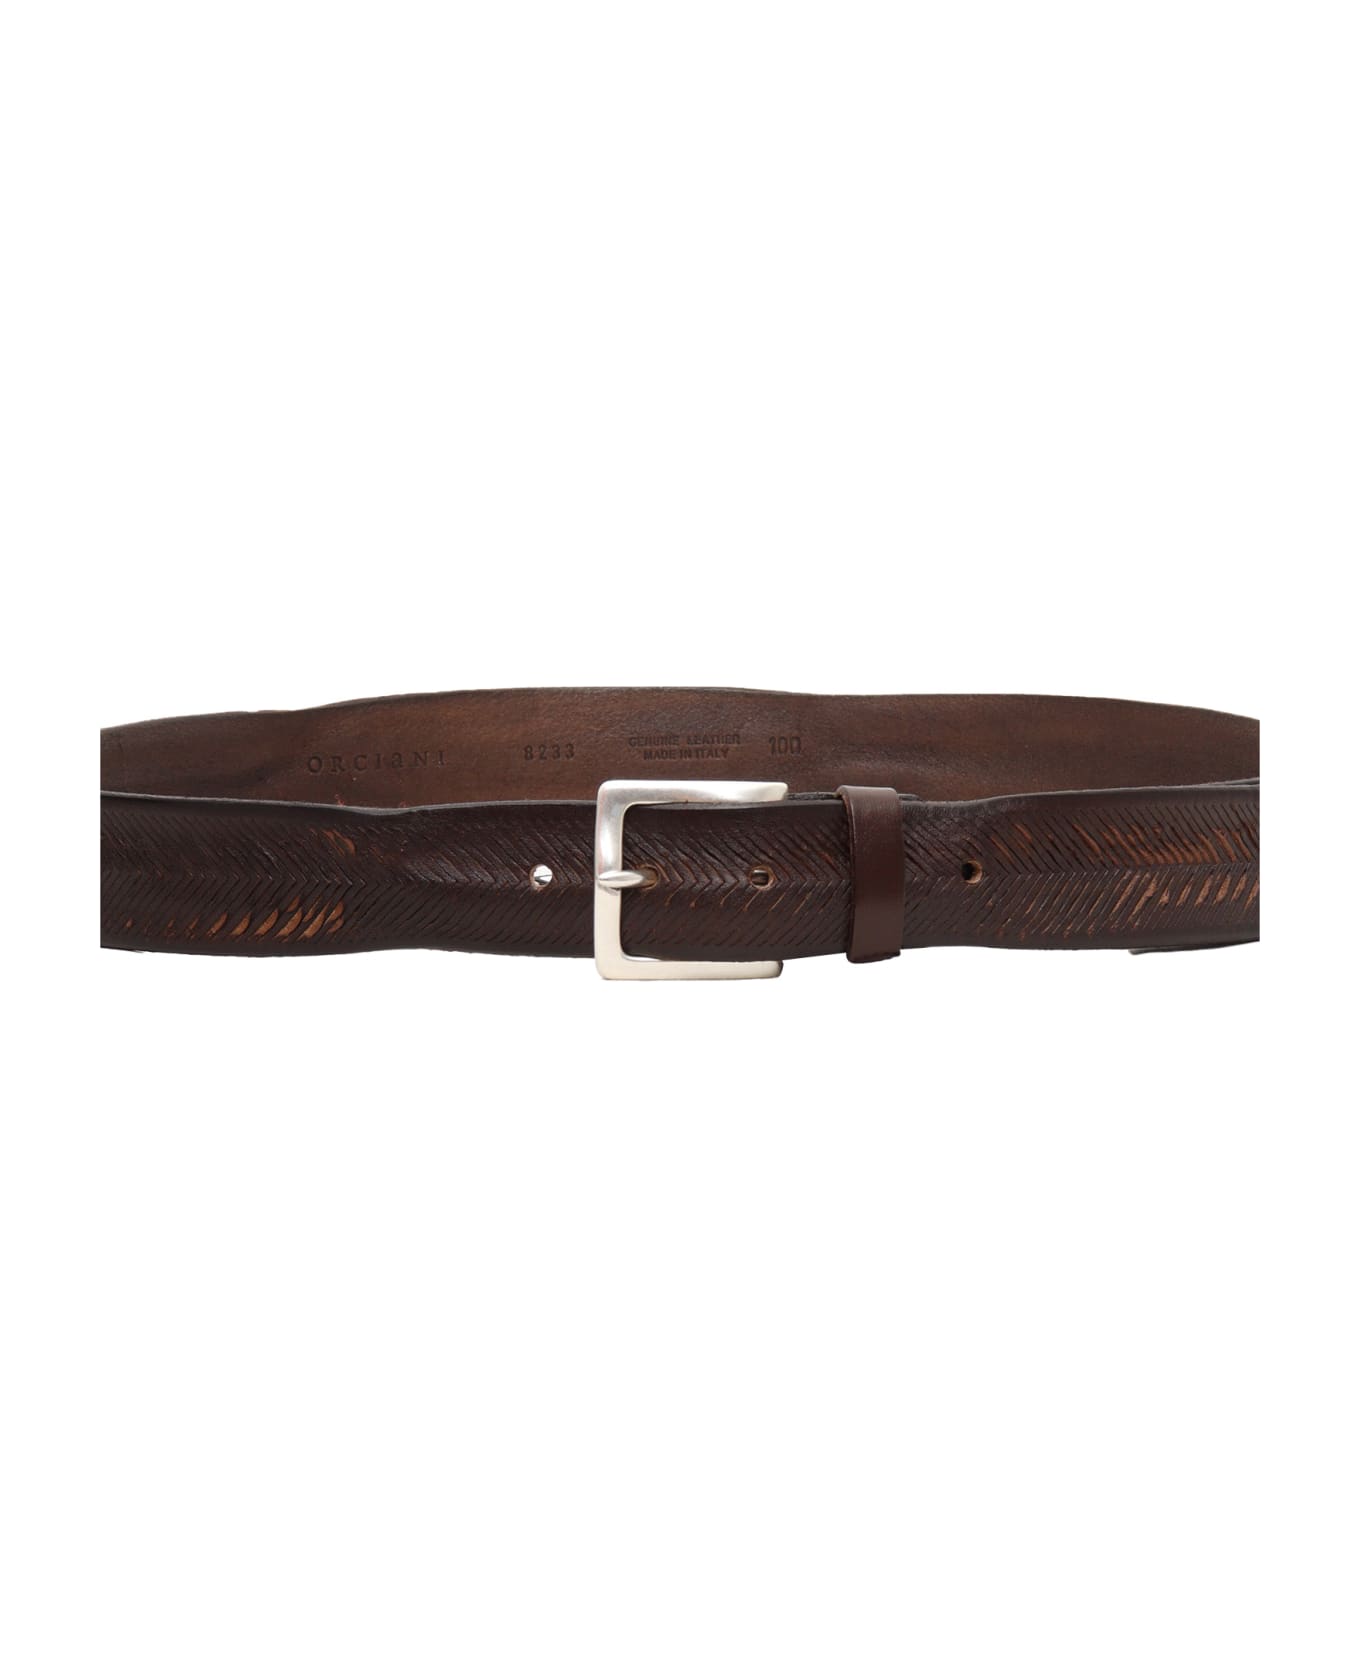 Orciani Carved Brown Belt - BROWN ベルト